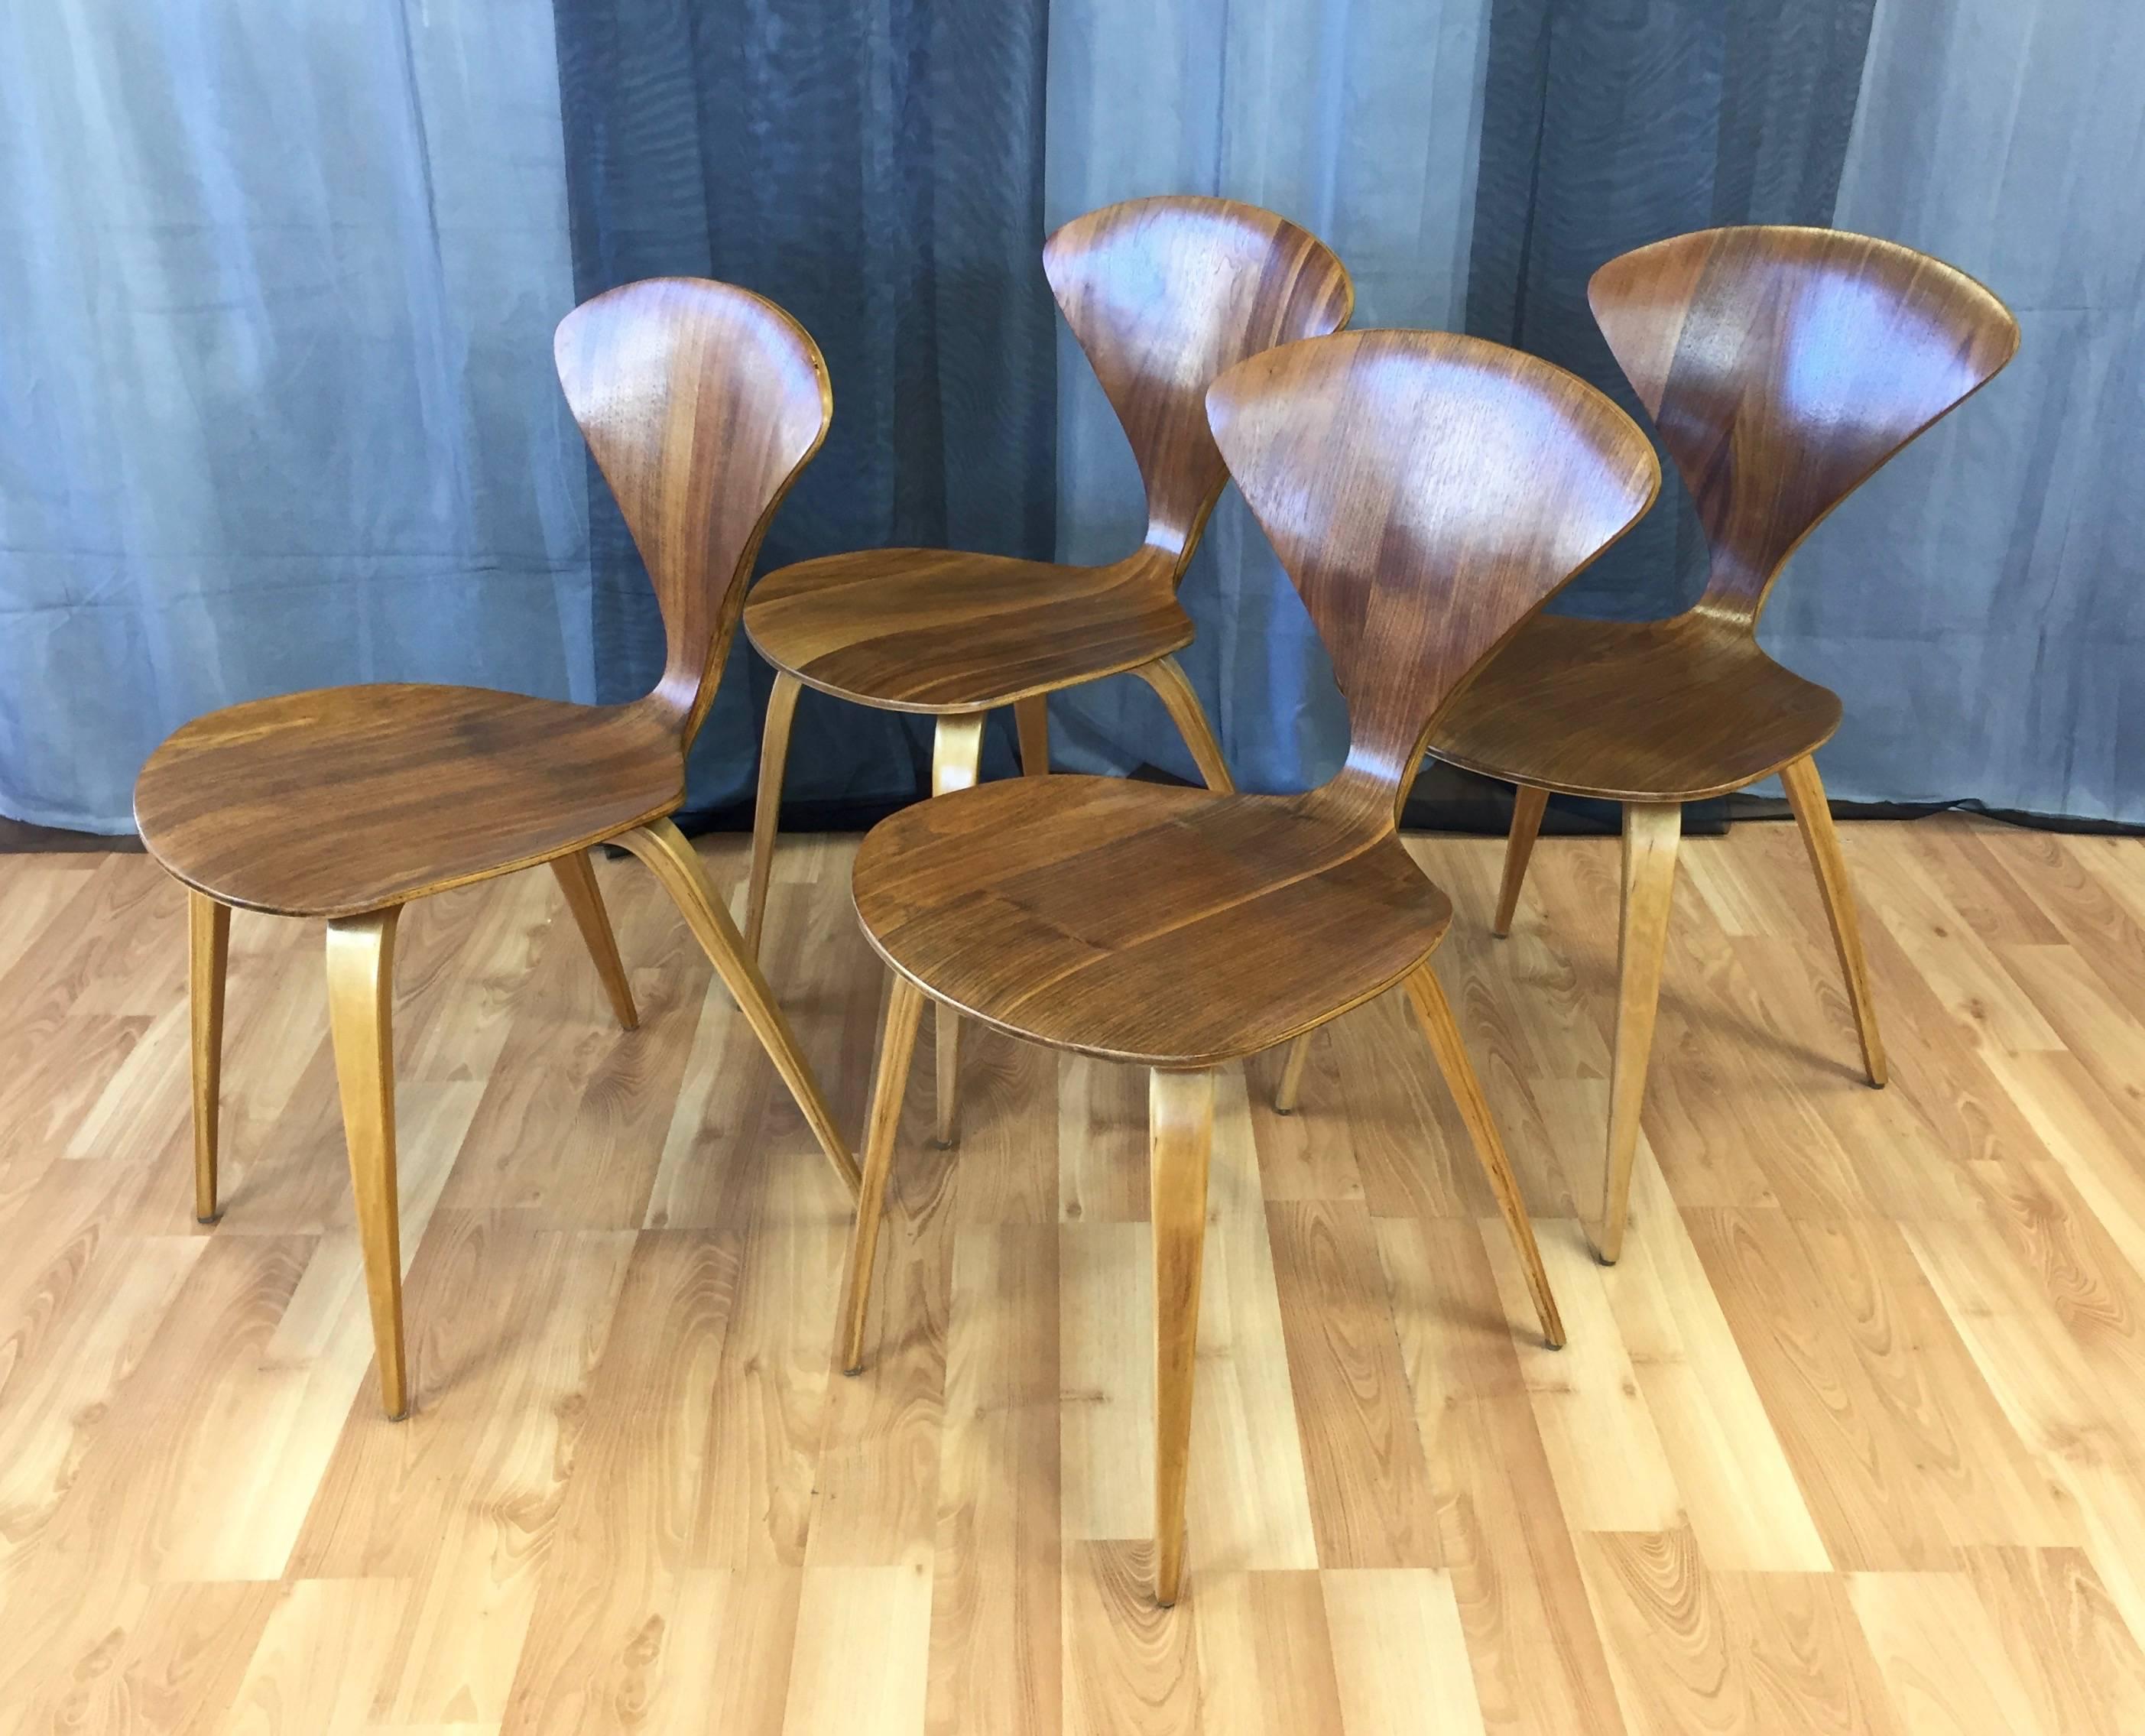 A four-piece set of vintage walnut and birch bentwood side or dining chairs by Norman Cherner for Plycraft.

American Mid-Century Modern design and craftsmanship in its most fluid and unfussy form. Walnut veneer over laminated plywood that varies